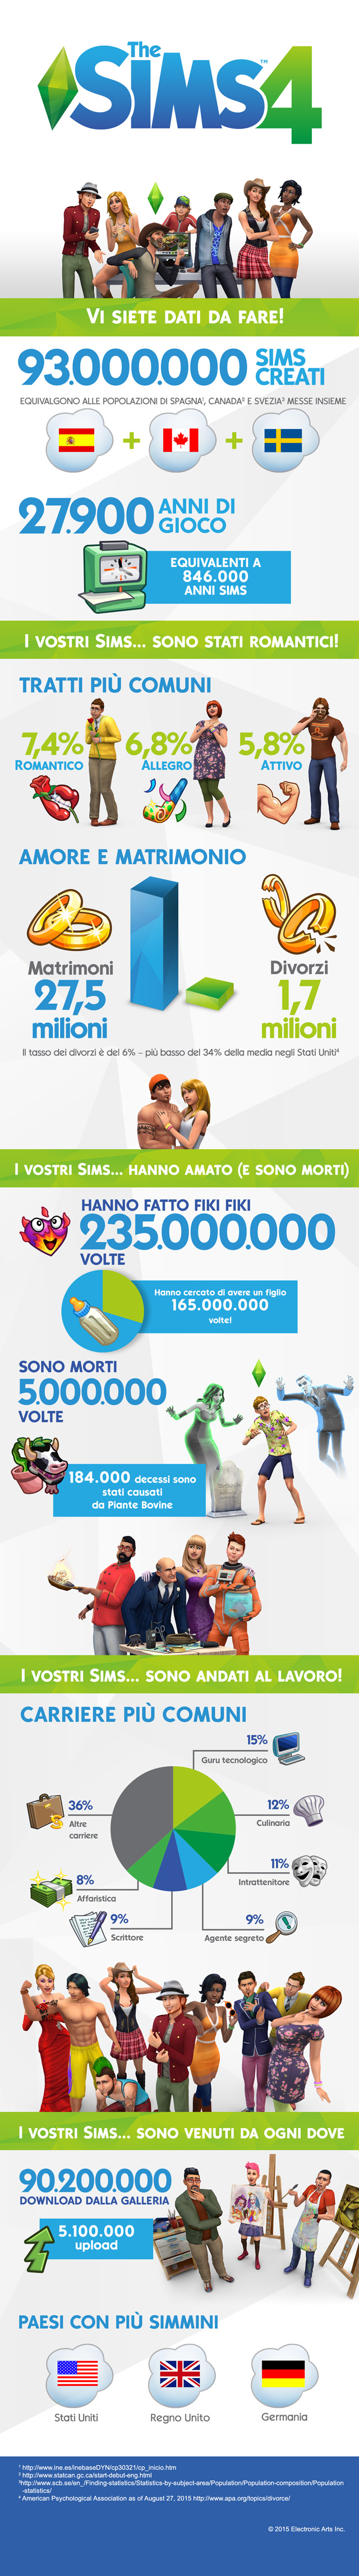 the sims 4 infographic